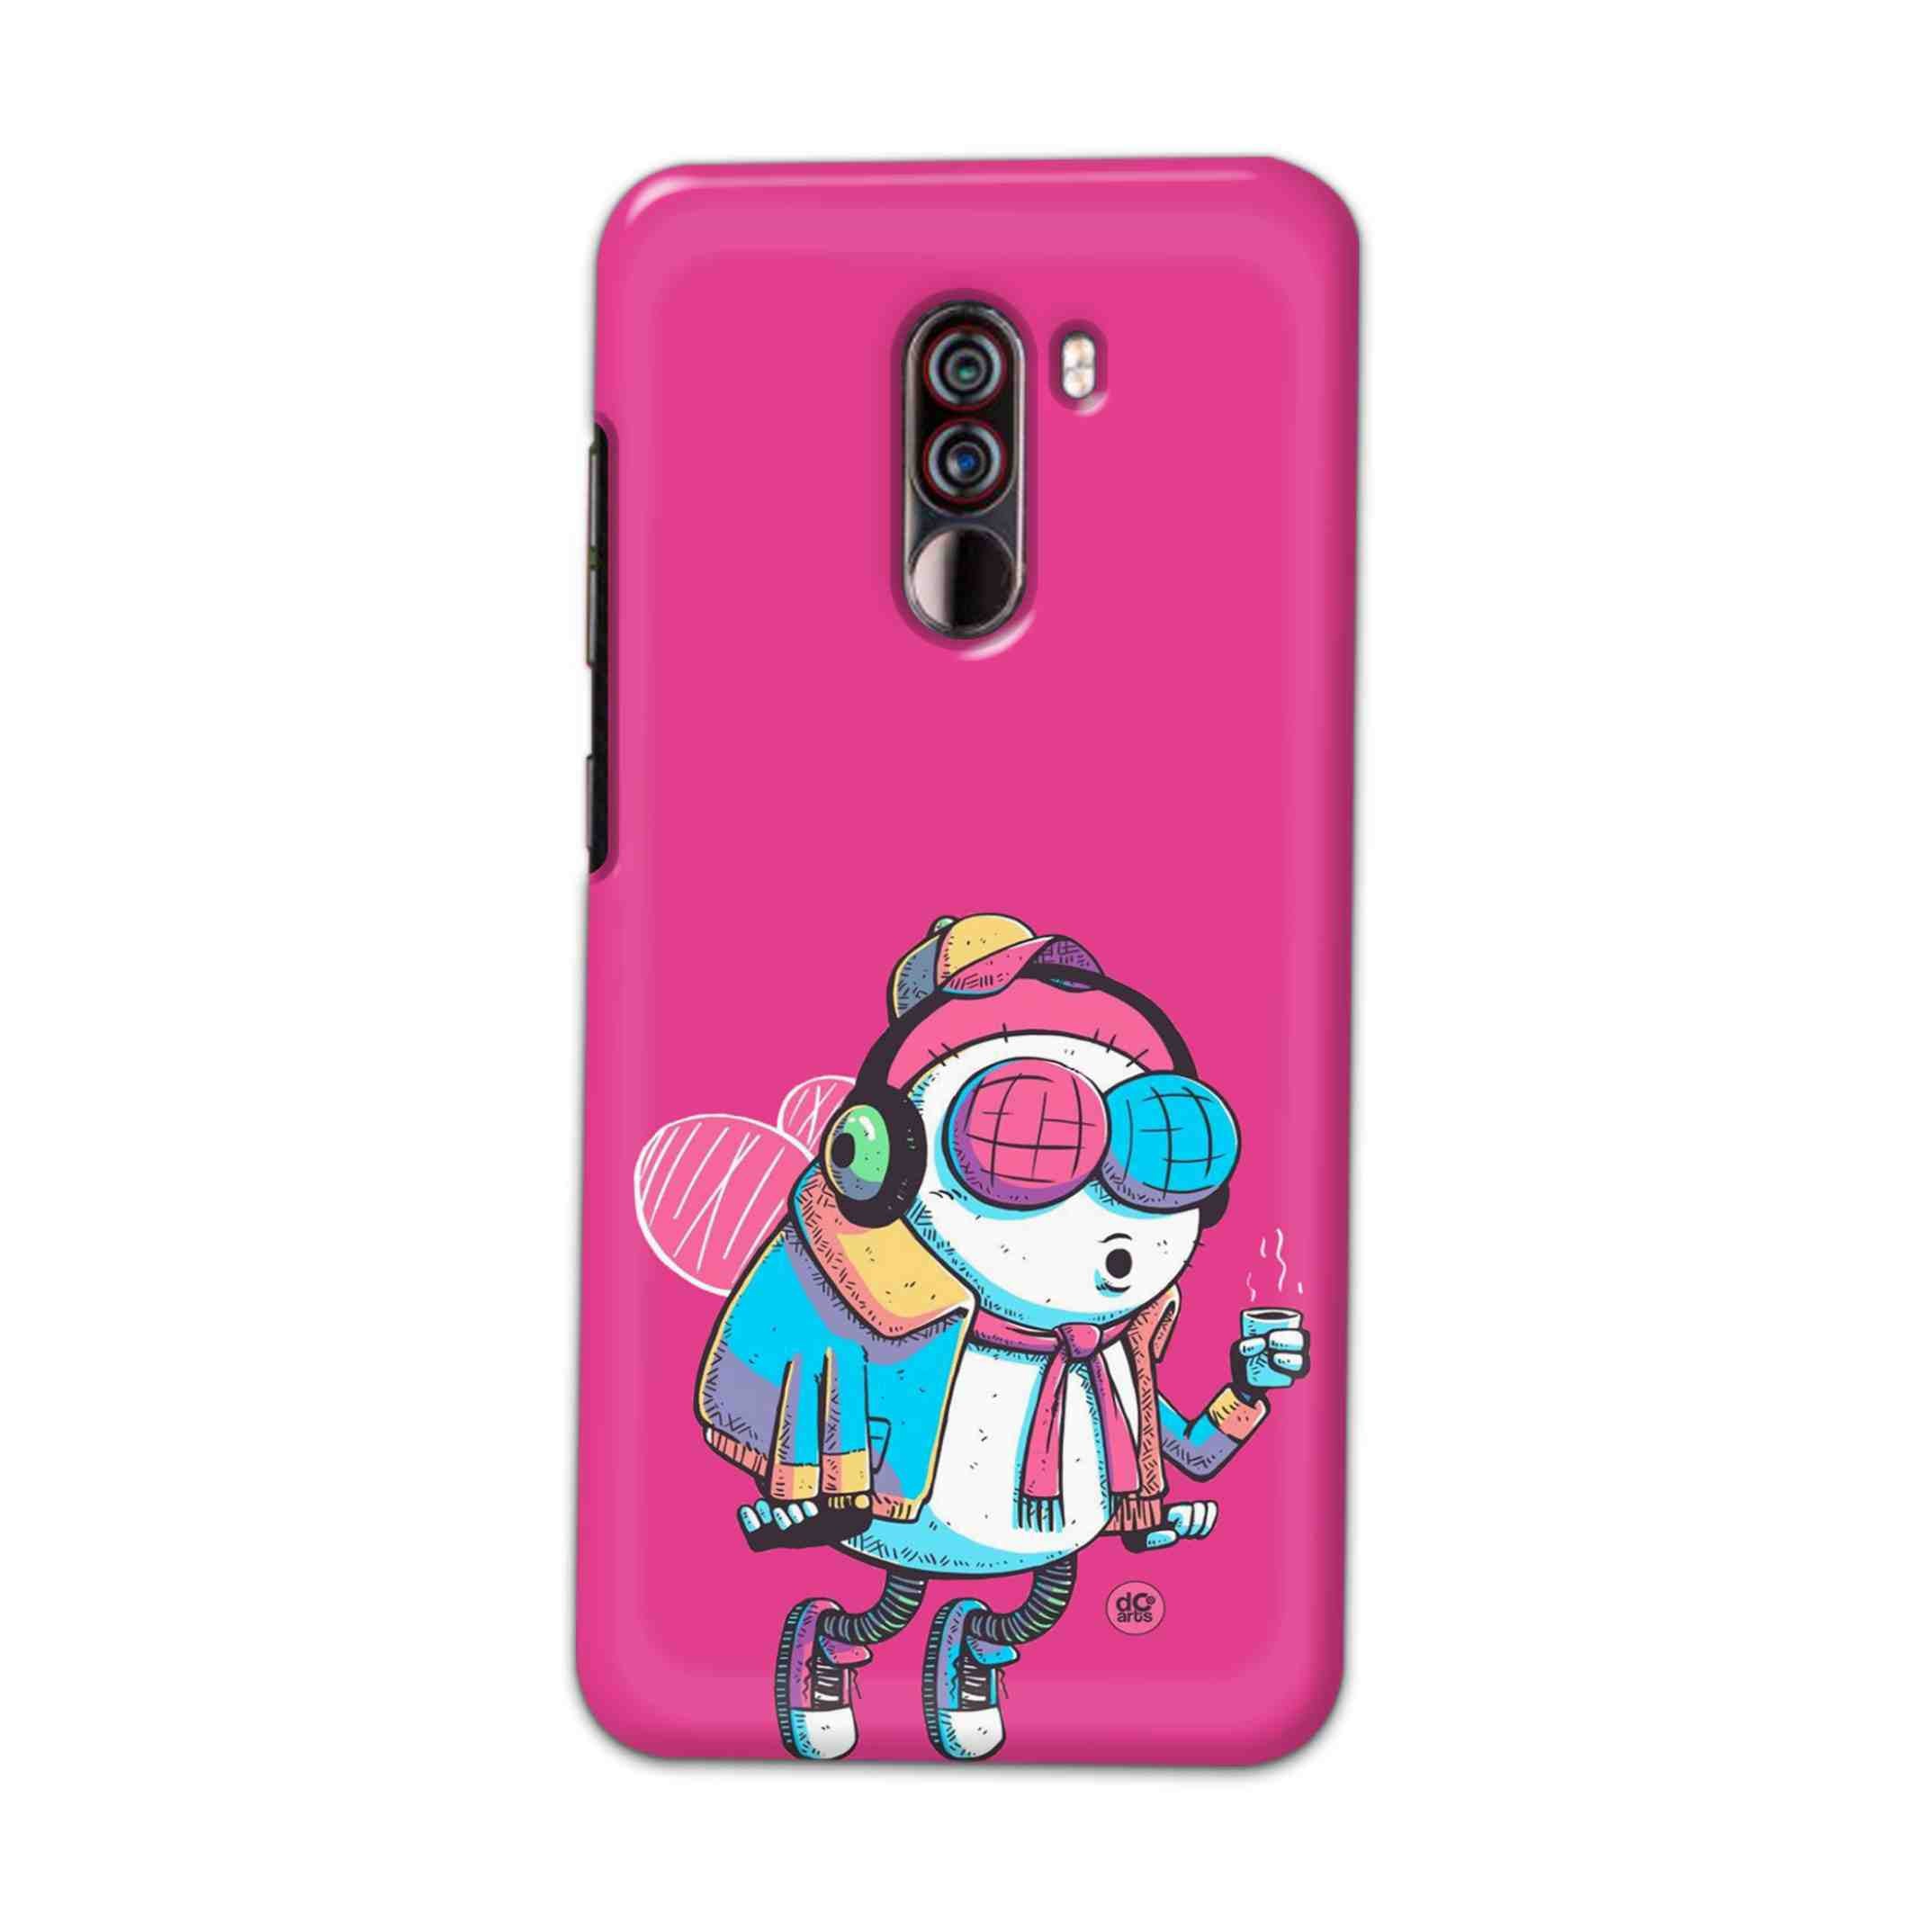 Buy Sky Fly Hard Back Mobile Phone Case Cover For Xiaomi Pocophone F1 Online